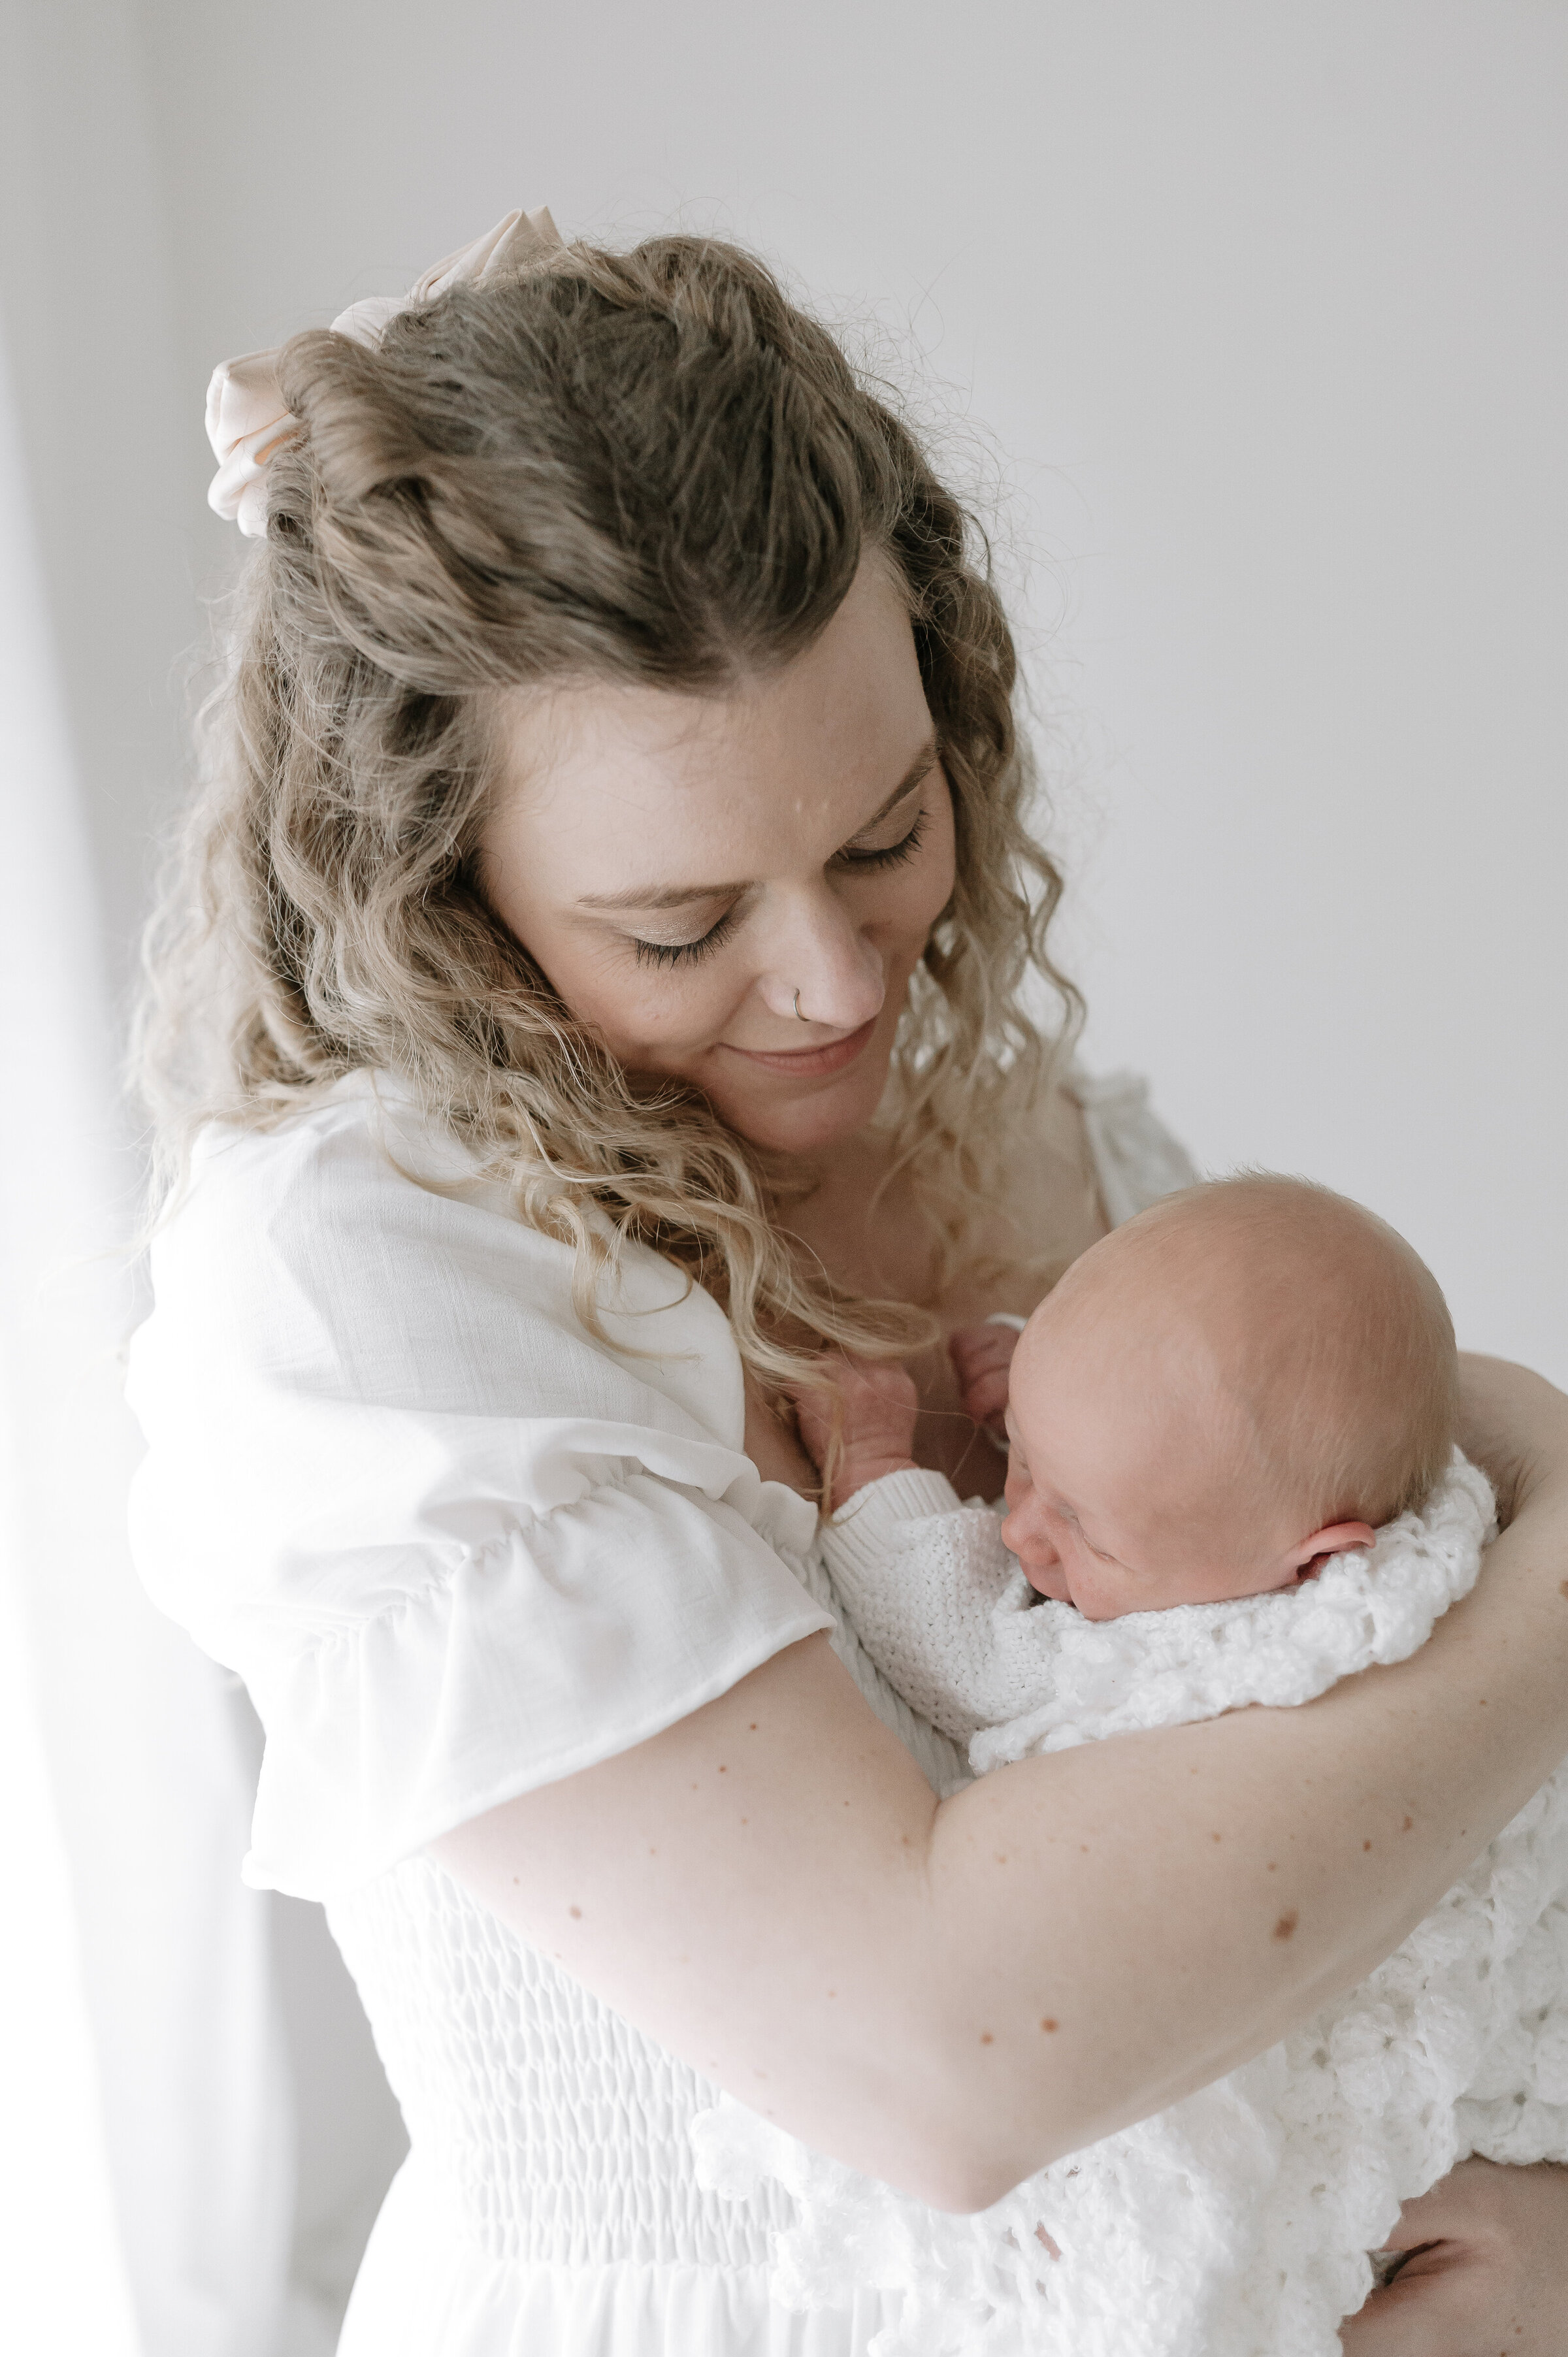 York and Yorkshire Newborn and Baby Photographer, Newborn. York Newborn Photographer, York Baby Photographer, Yorkshire, Baby Photographers, Maternity, Harrogate, Leeds, Family Photography